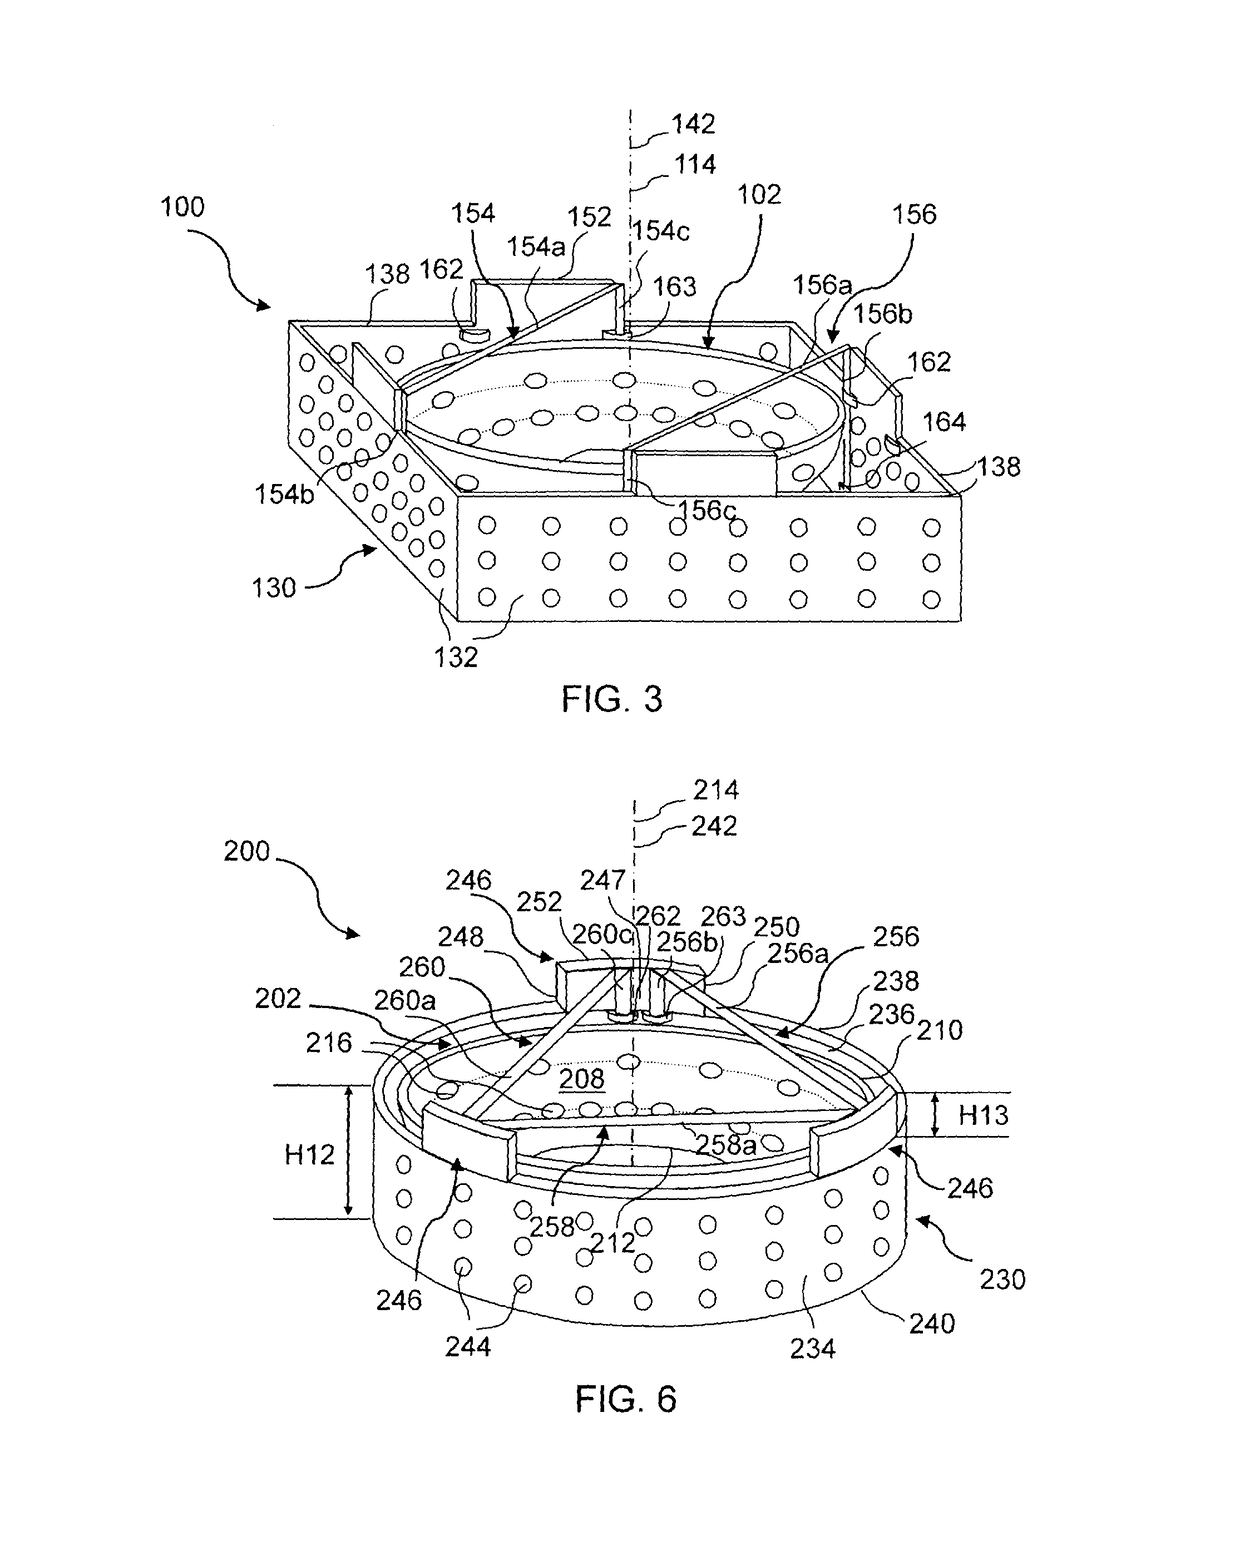 Removable apparatus to regulate flame heat transfer and retain dripping liquid substance for a gas stove burner